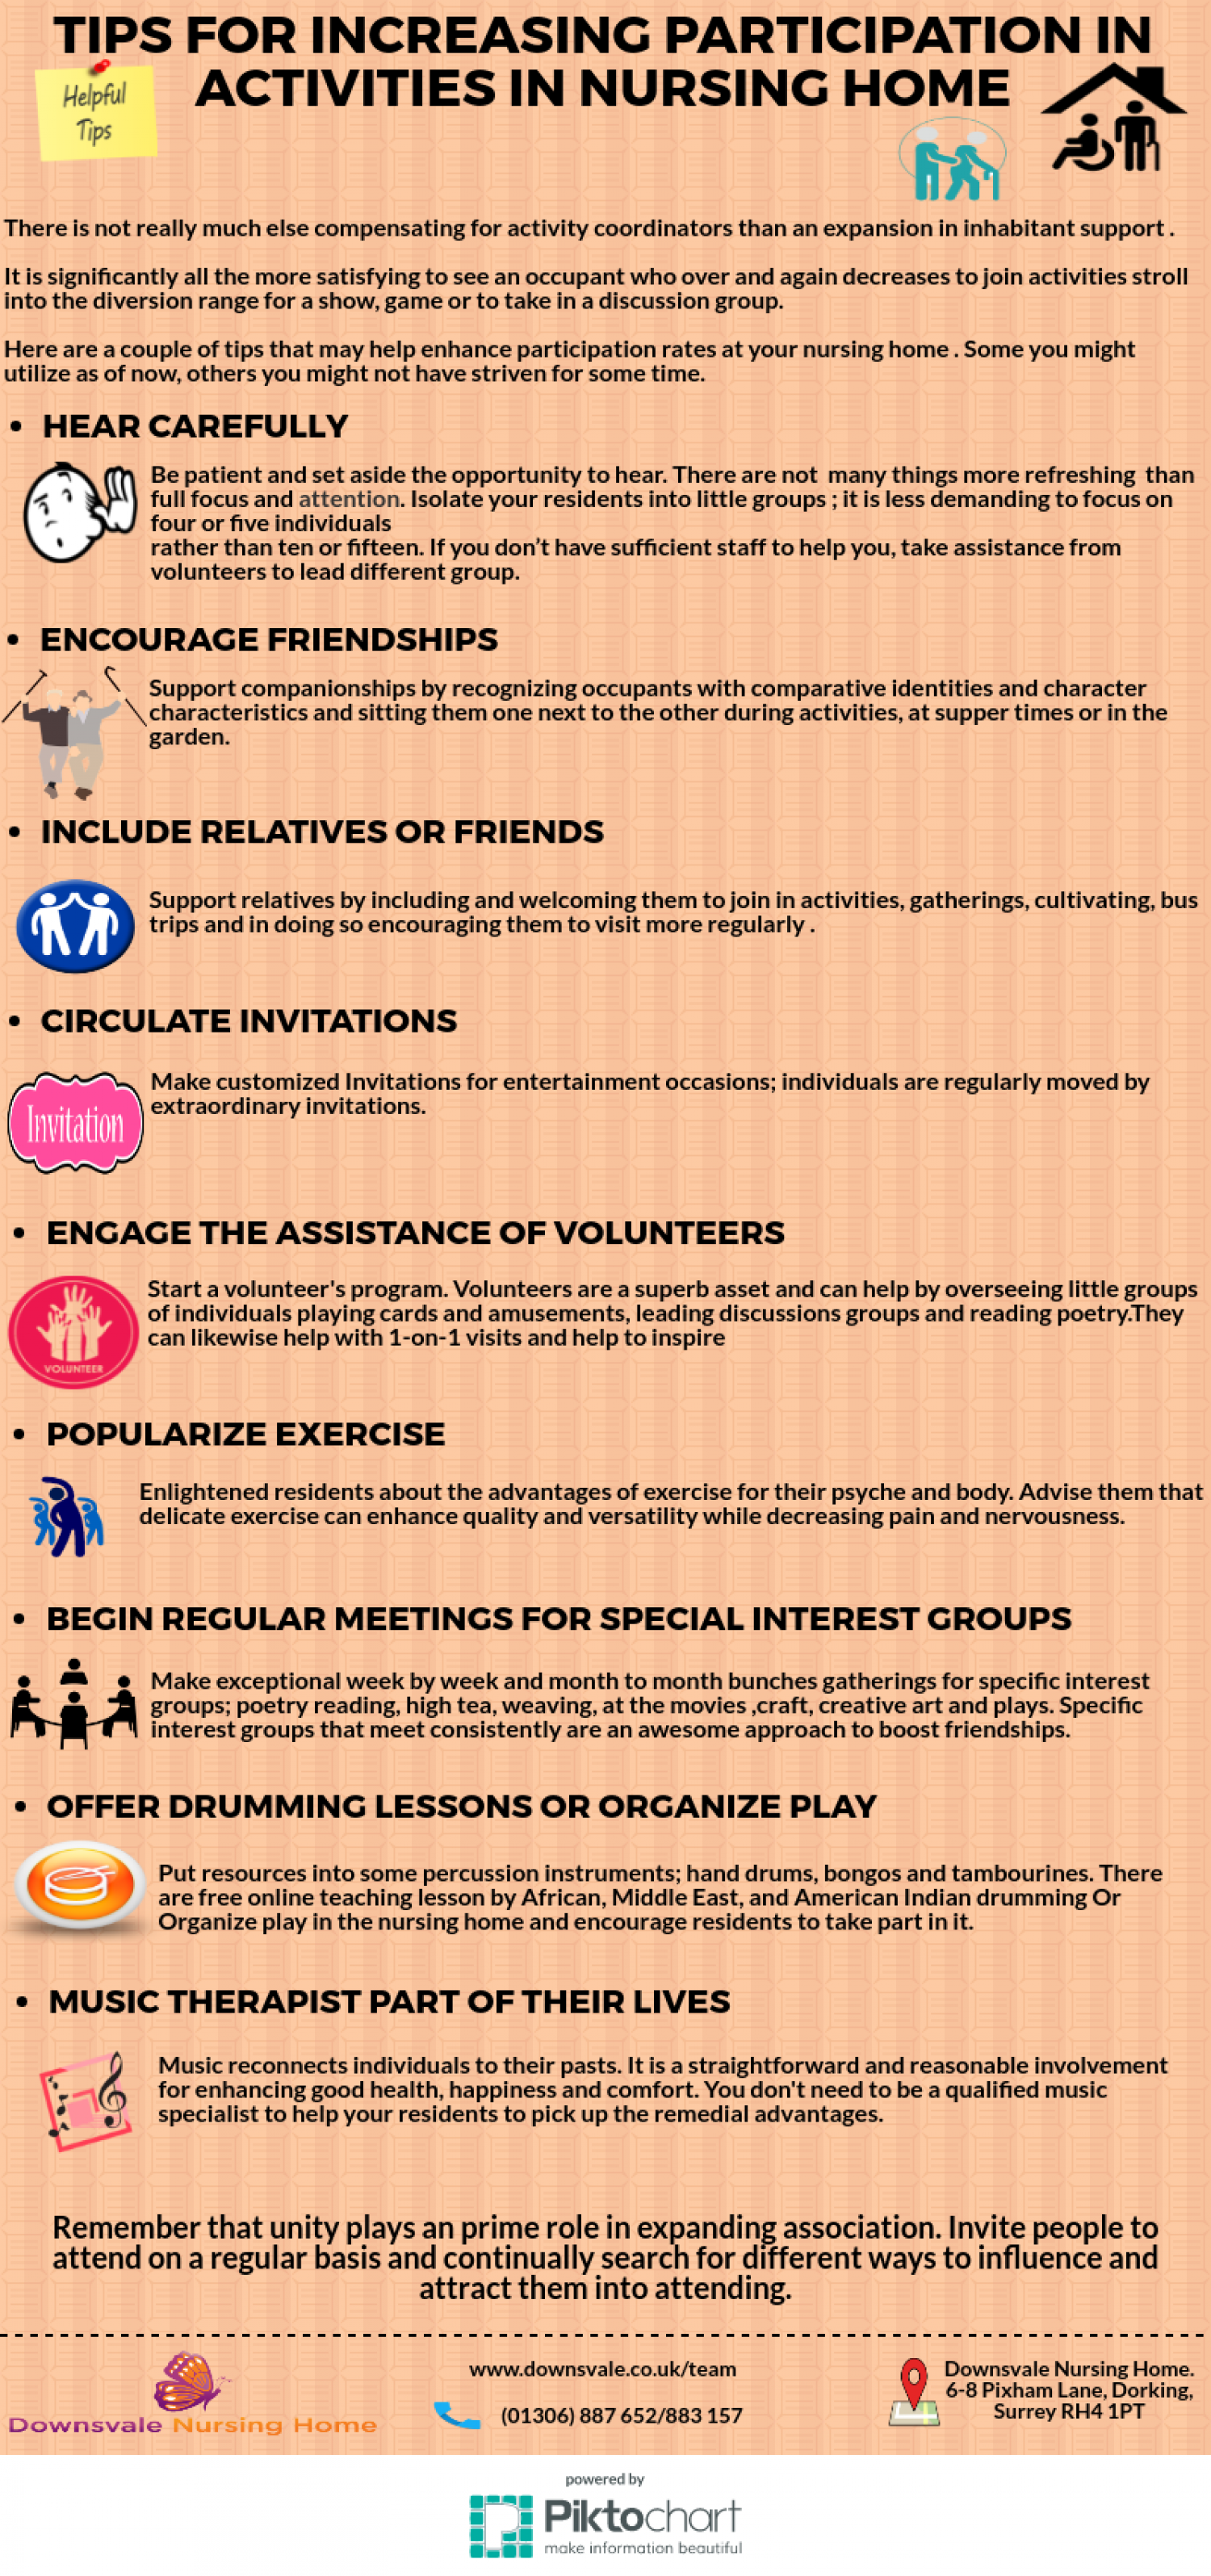 Tips for Increasing Participation in Activities in Nursing Home  Infographic